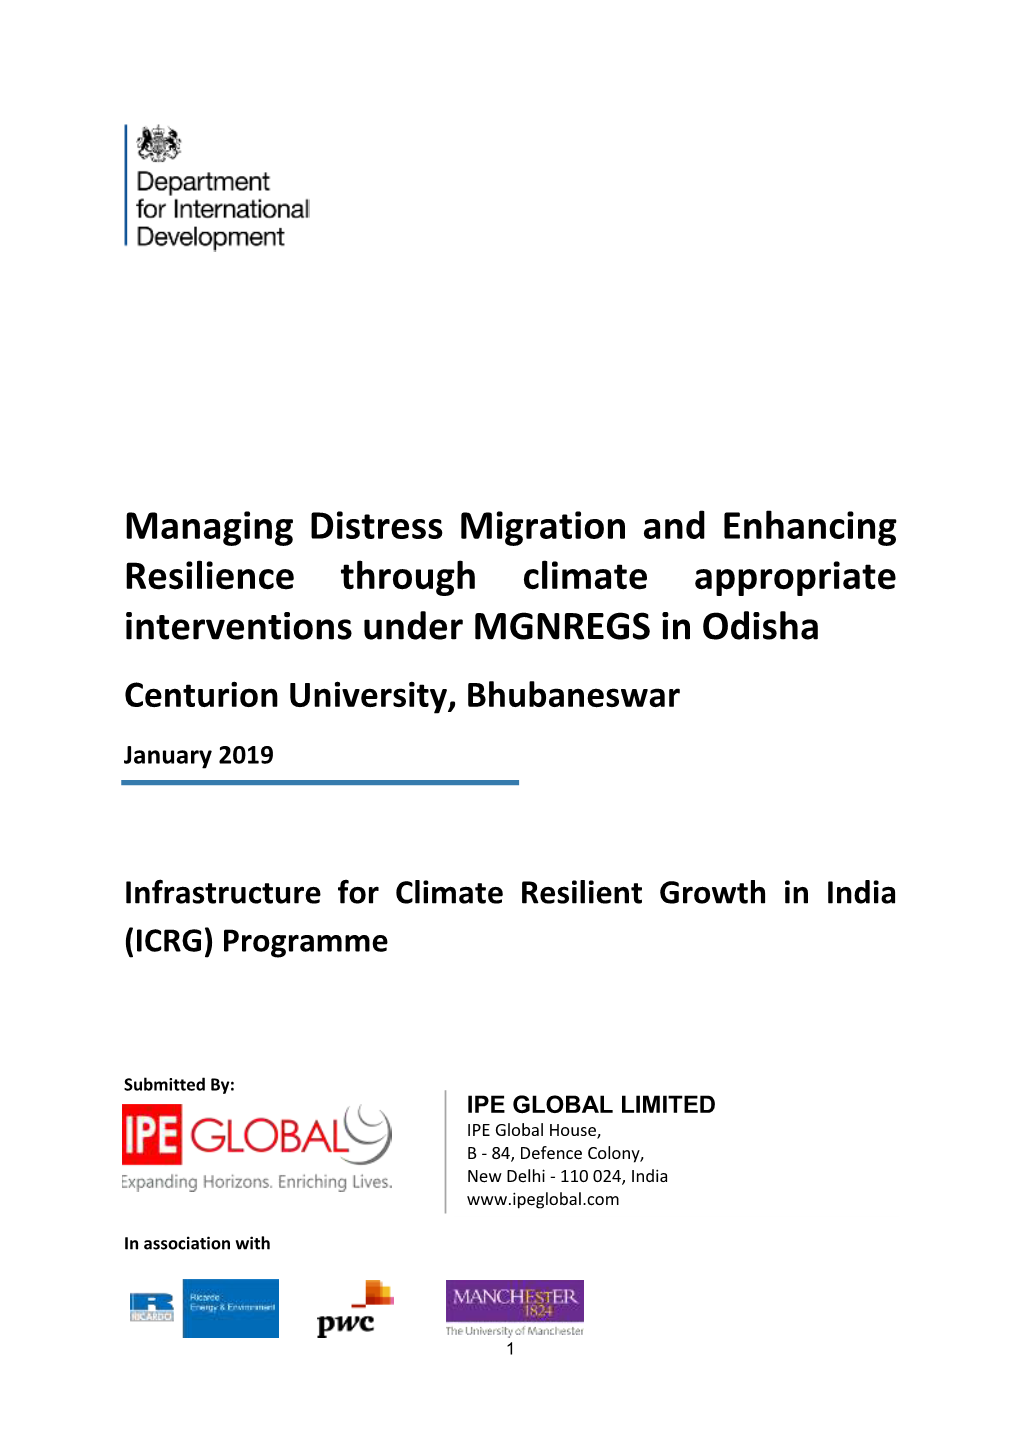 Managing Distress Migration and Enhancing Resilience Through Climate Appropriate Interventions Under MGNREGS in Odisha Centurion University, Bhubaneswar January 2019